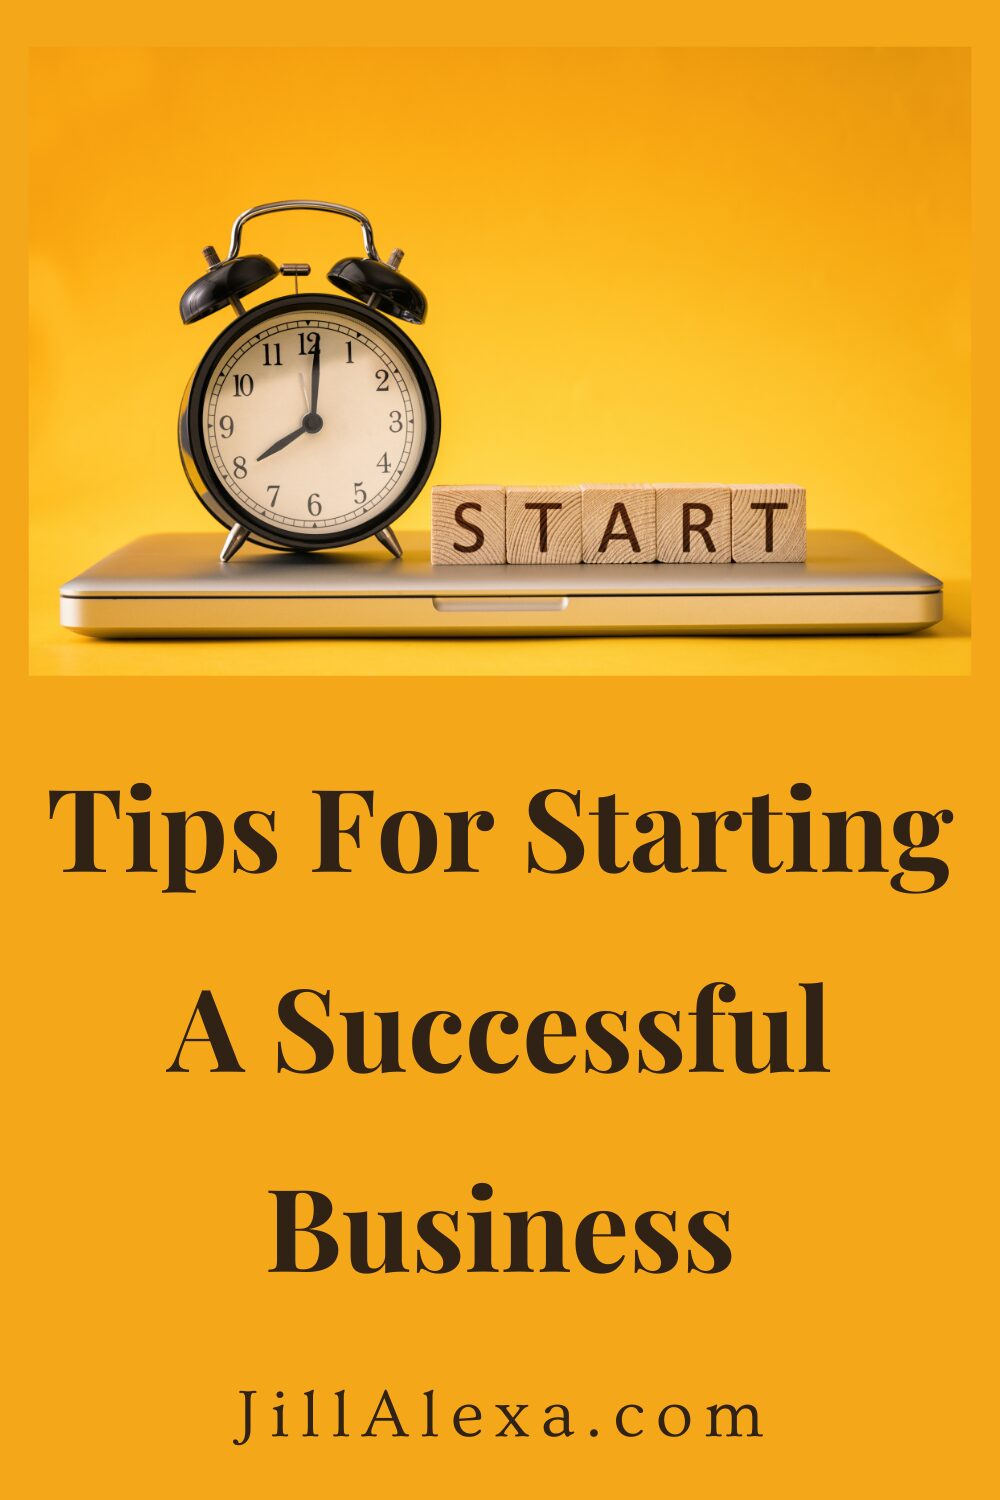 Starting a successful business from scratch can seem like a huge challenge, so here are 4 golden tips to ease your path and give you that competitive edge.